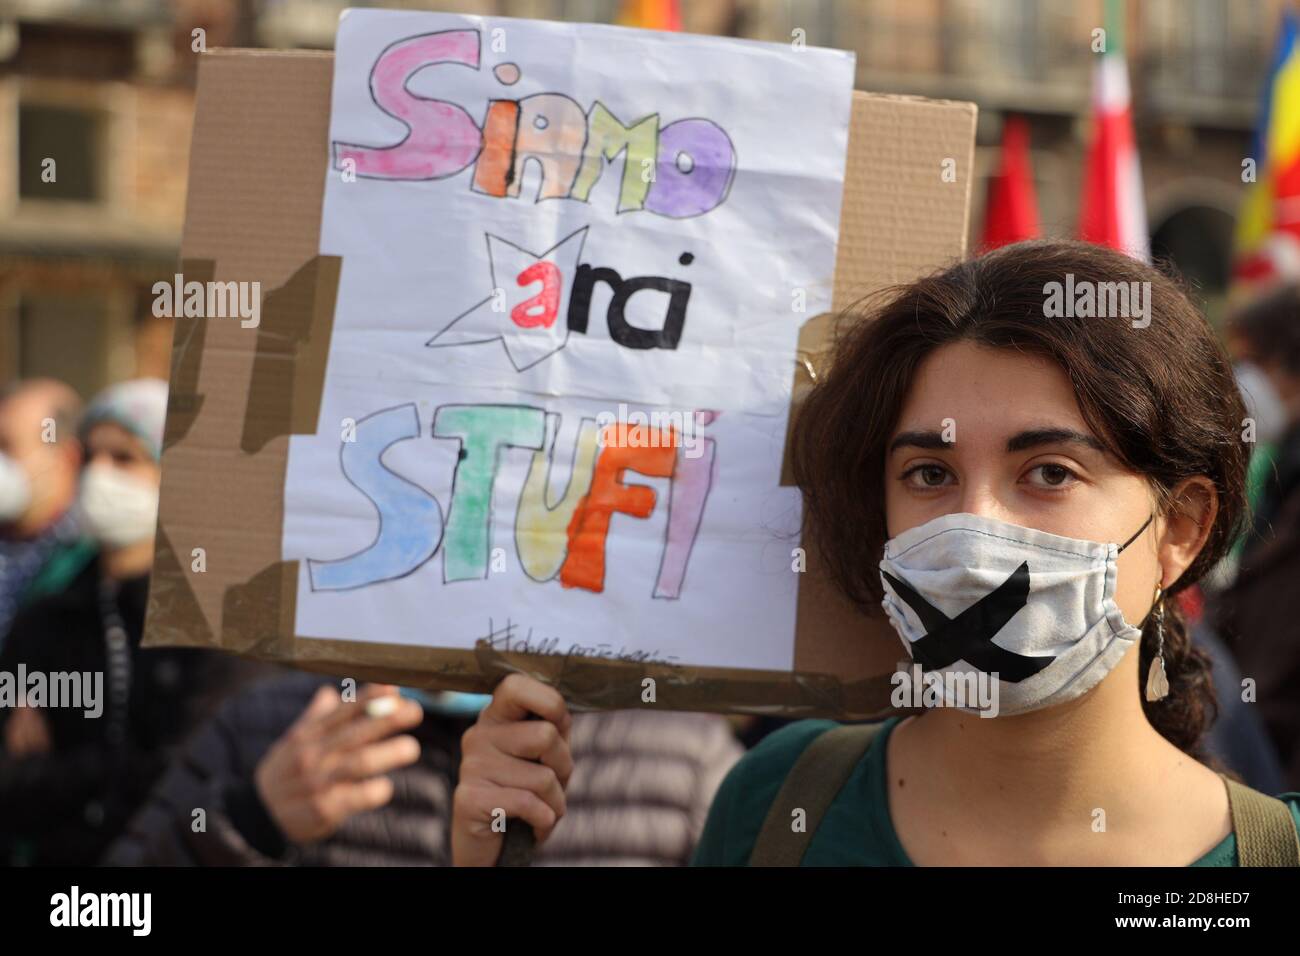 Turin, Italy. 30th Oct, 2020. People working in the cultural and entertainment sector demonstrate with facemasks to highlight the plight facing the entertainment industry and its workers brought about by the COVID-19 pandemic. Credit: MLBARIONA/Alamy Live News Stock Photo